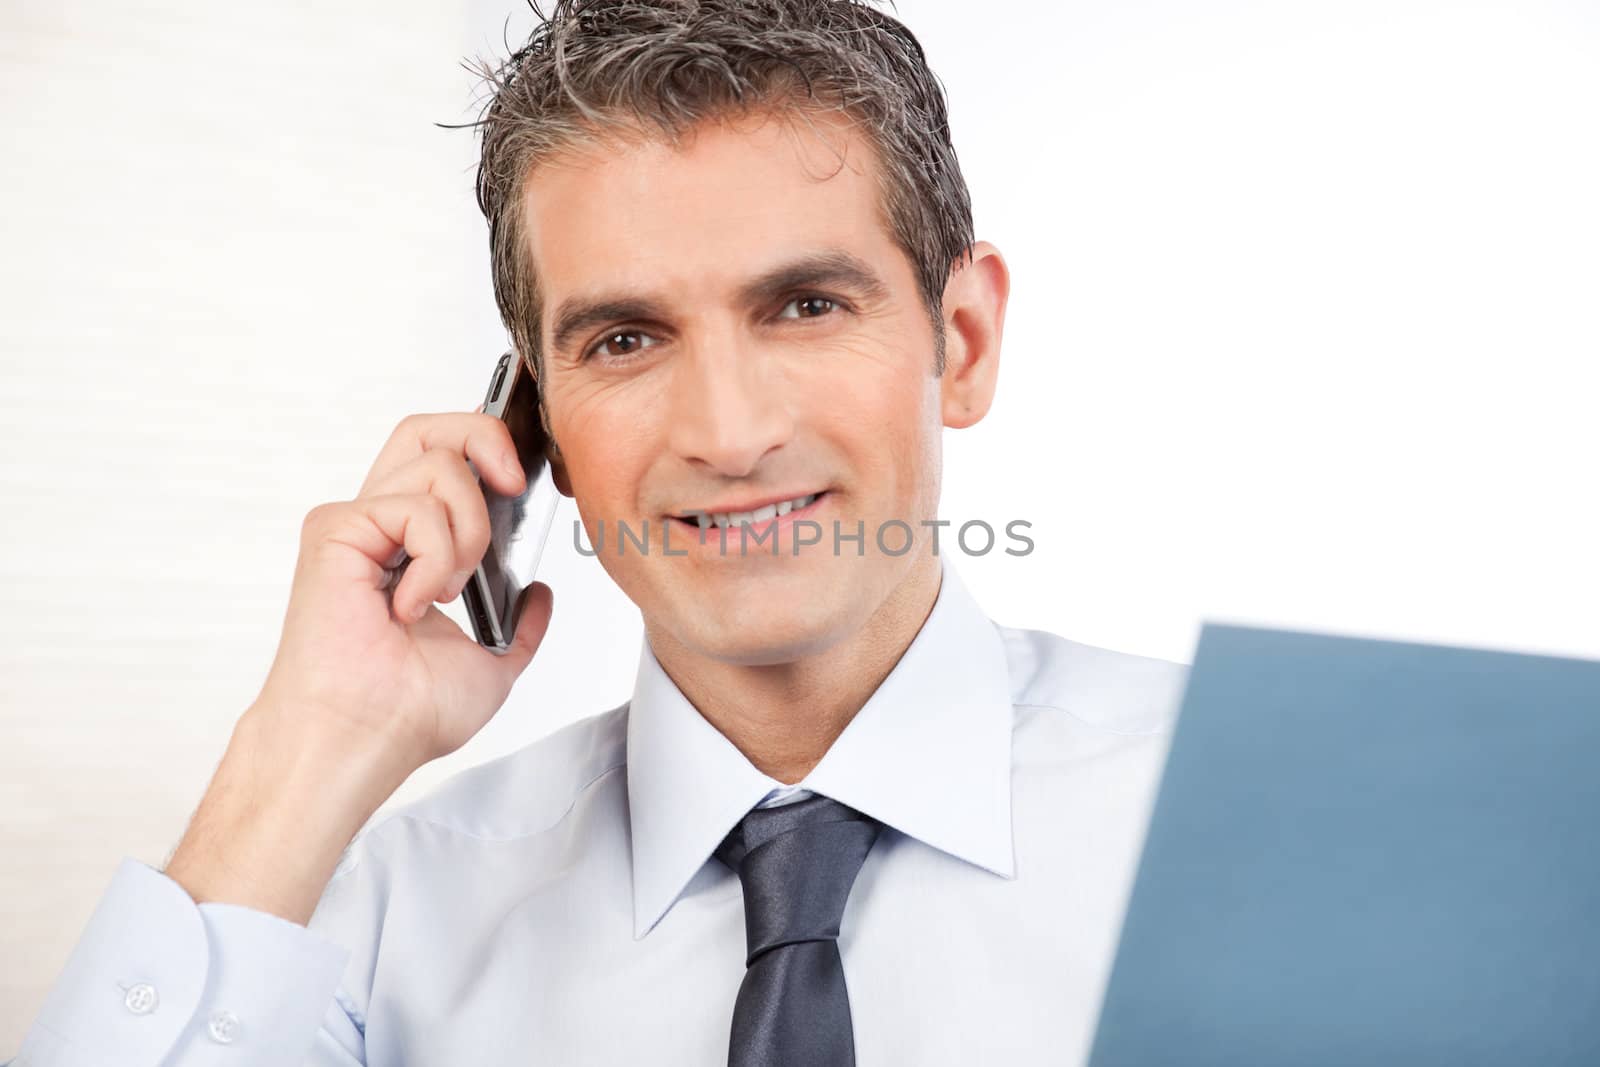 Businessman talking on cell phone at work isolated on white background.